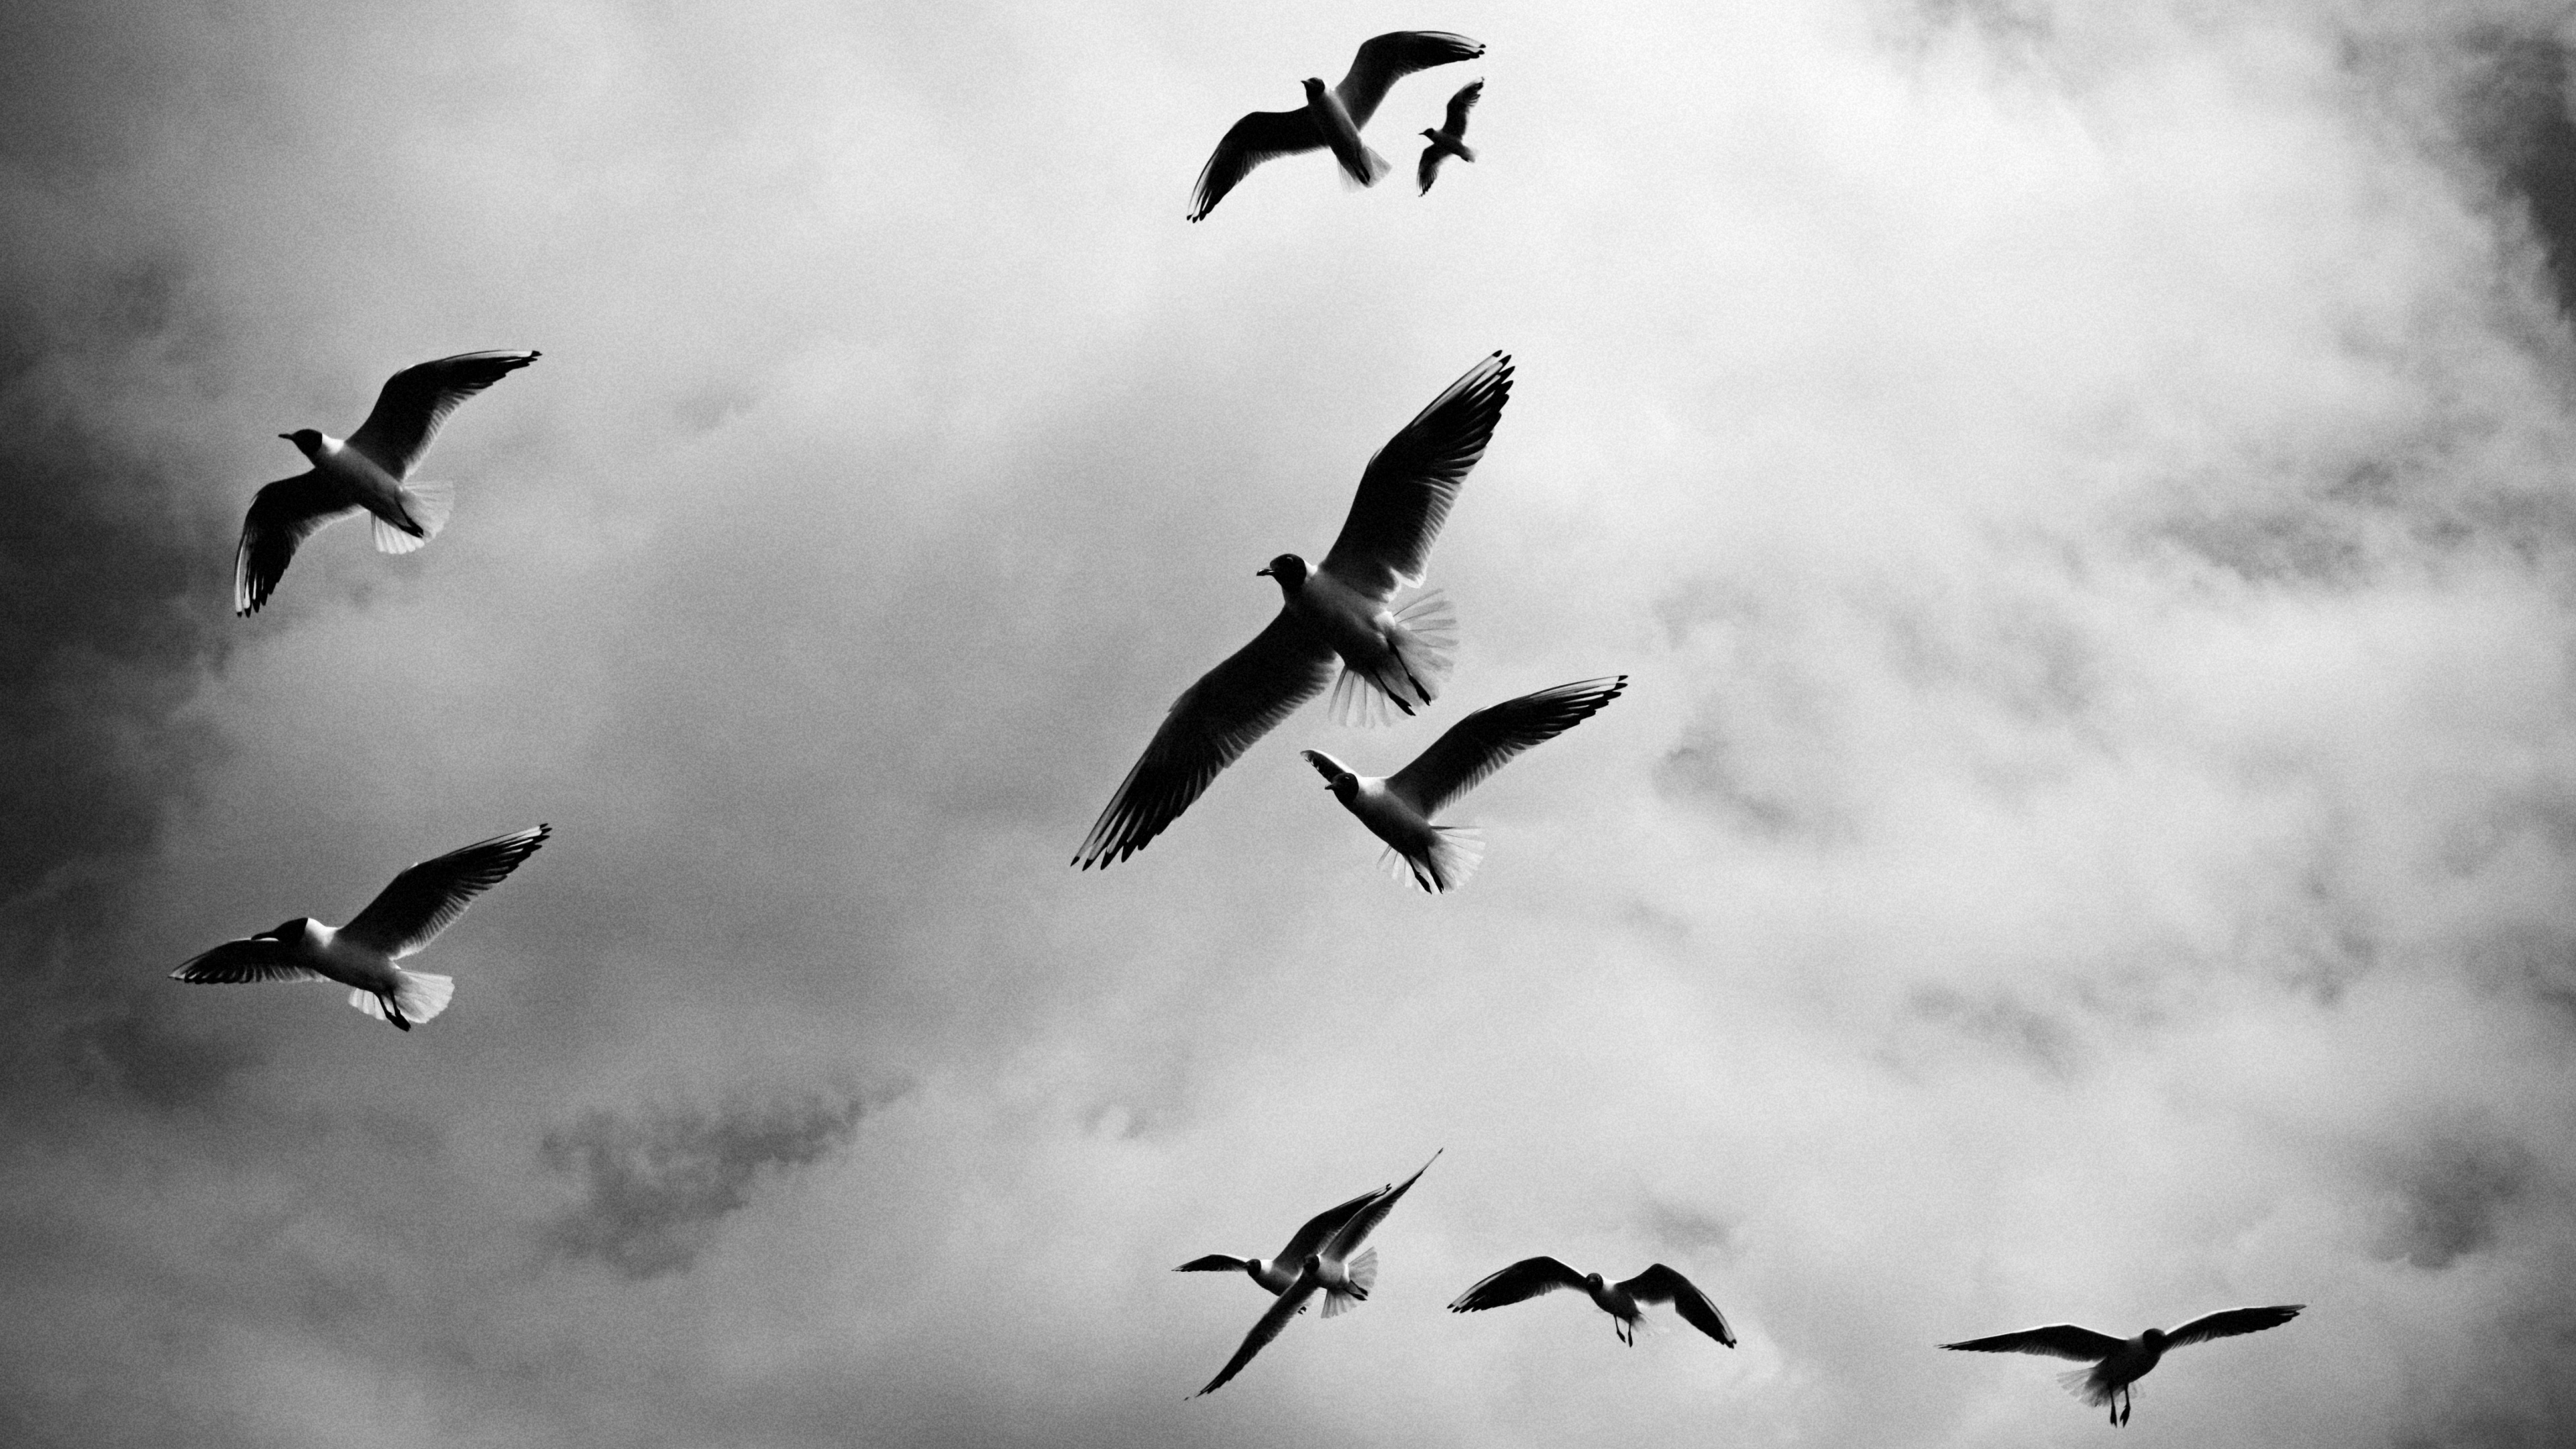 Grayscale Photography of Birds Flying. Wallpaper in 3840x2160 Resolution